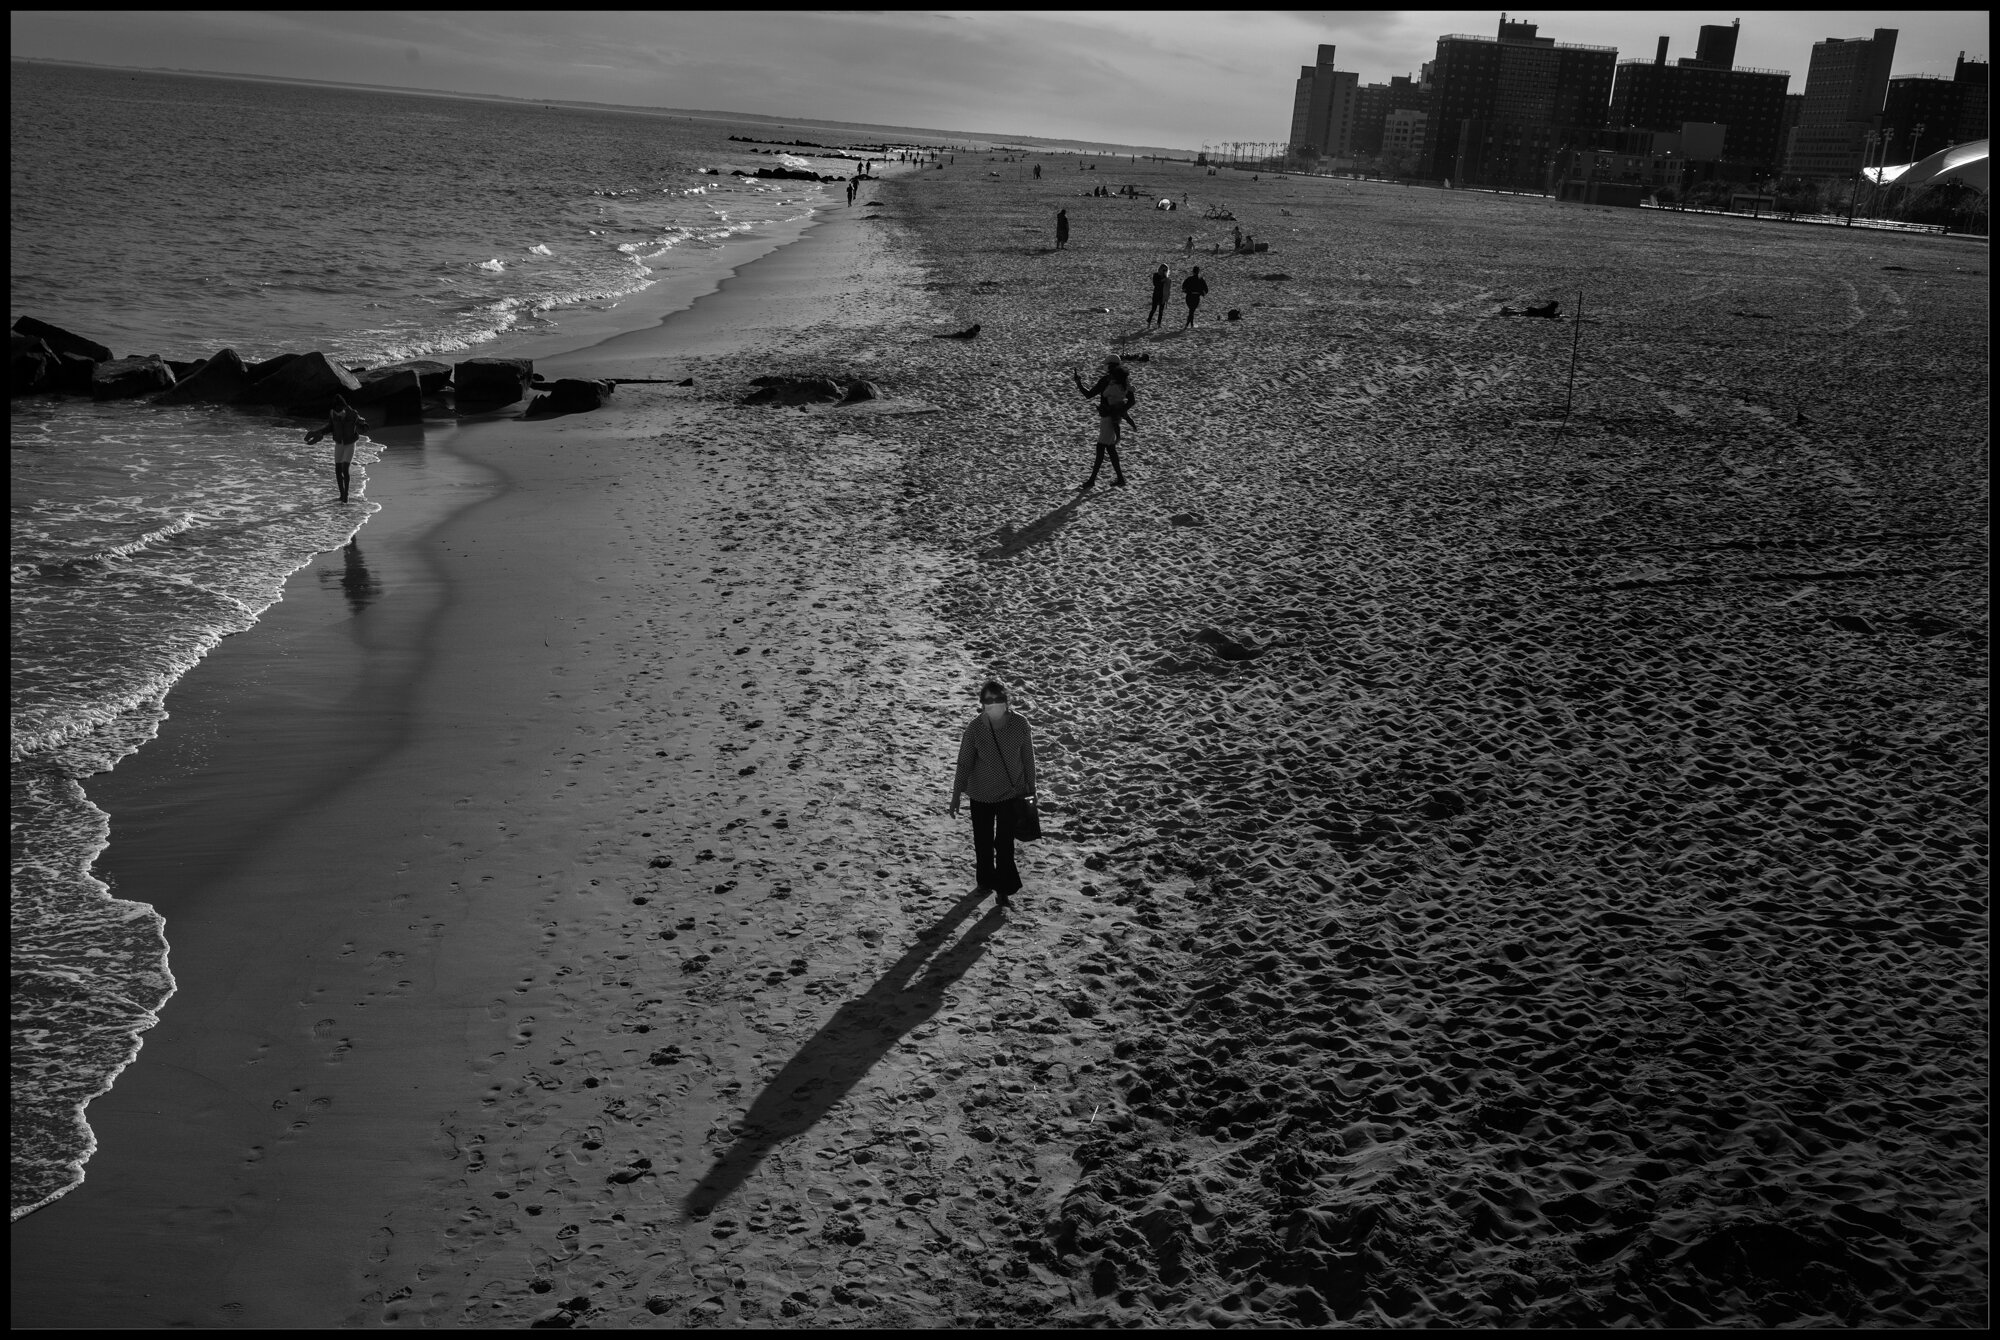  A day when the masks came off at Coney Island.  May 16, 2020. © Peter Turnley.  ID# 49-015 